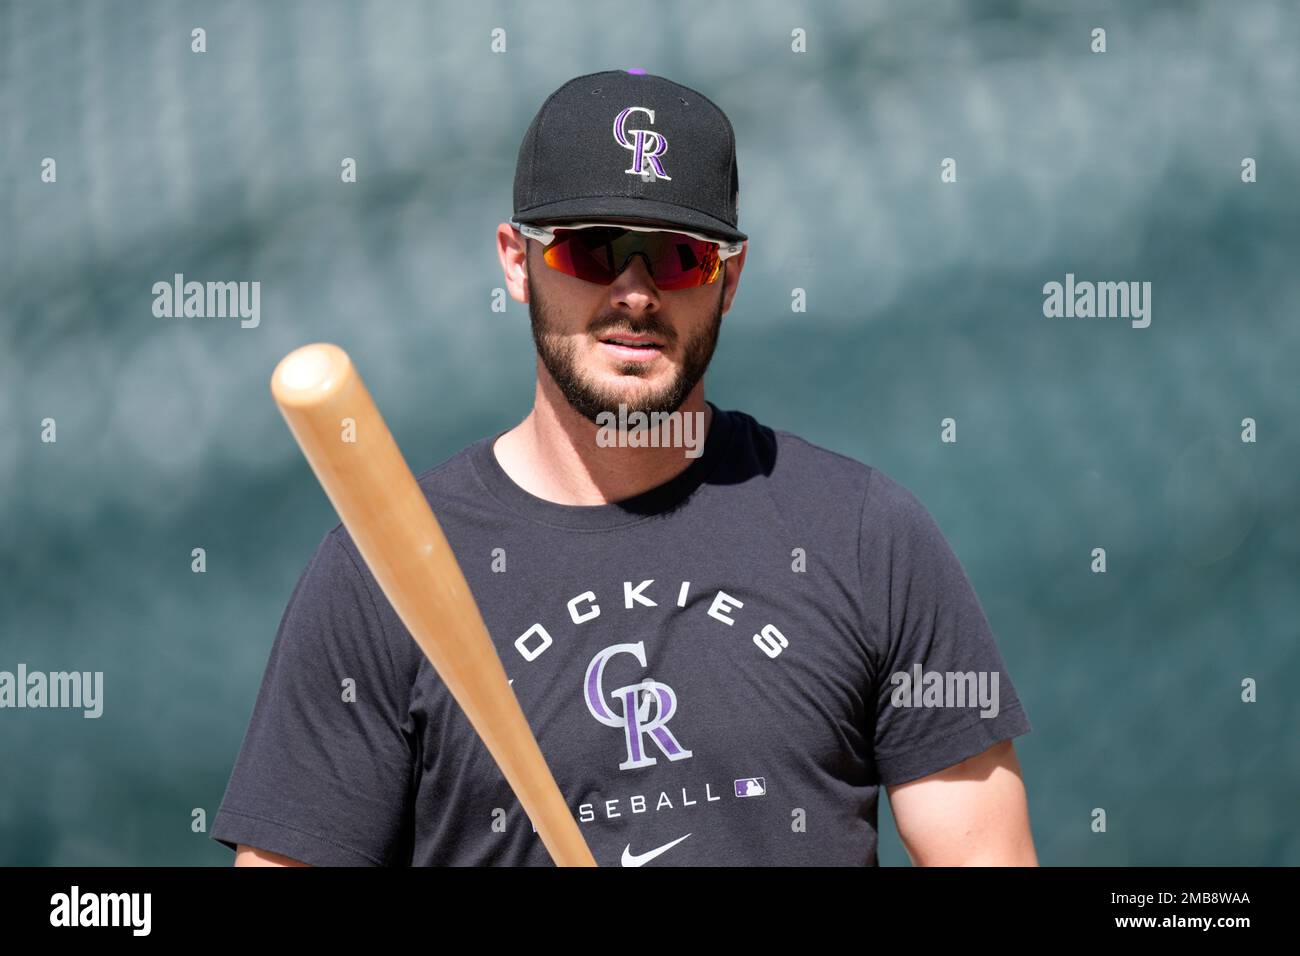 Rockies activate outfielder Kris Bryant from injured list